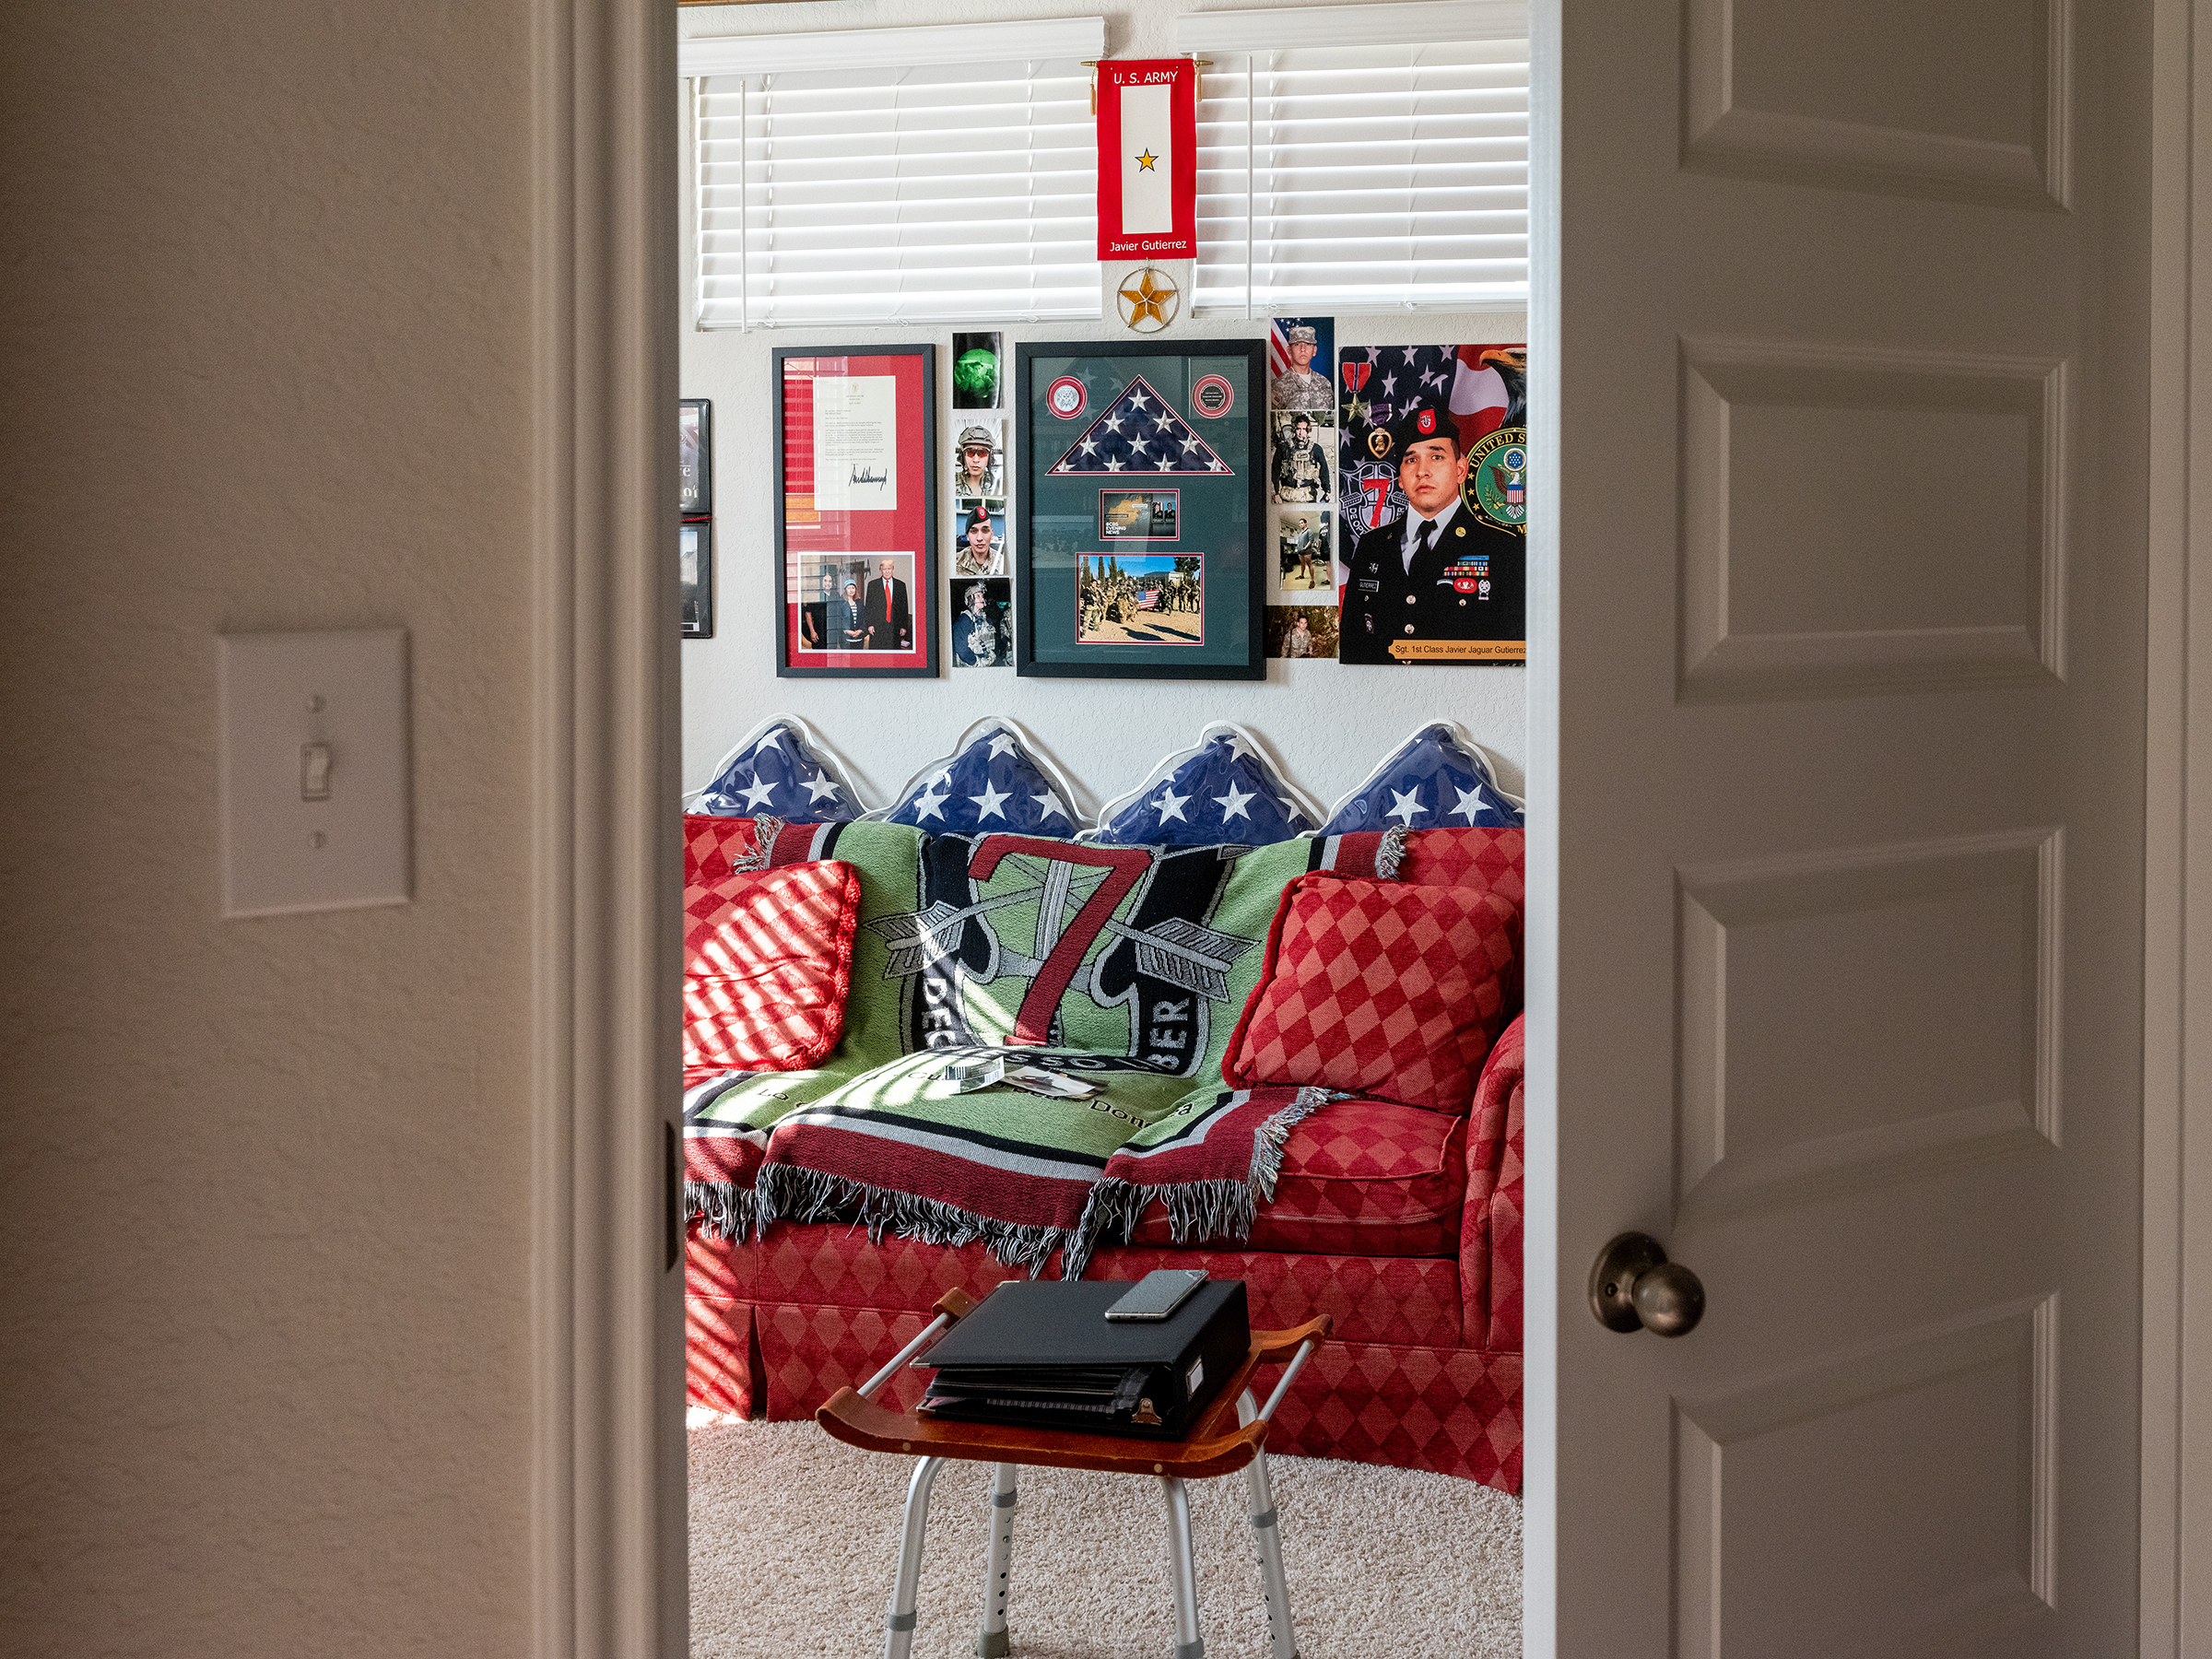 In San Antonio, Texas, on Aug. 26, the sunroom in the two-story brick home of Sergeant First Class Javier Jaguar Gutierrez's parents is decorated with remembrances of their fallen son, an American service member who was killed in February 2020 by an Afghan soldier just weeks before a peace deal was signed between the U.S. and the Taliban. He was <a href=